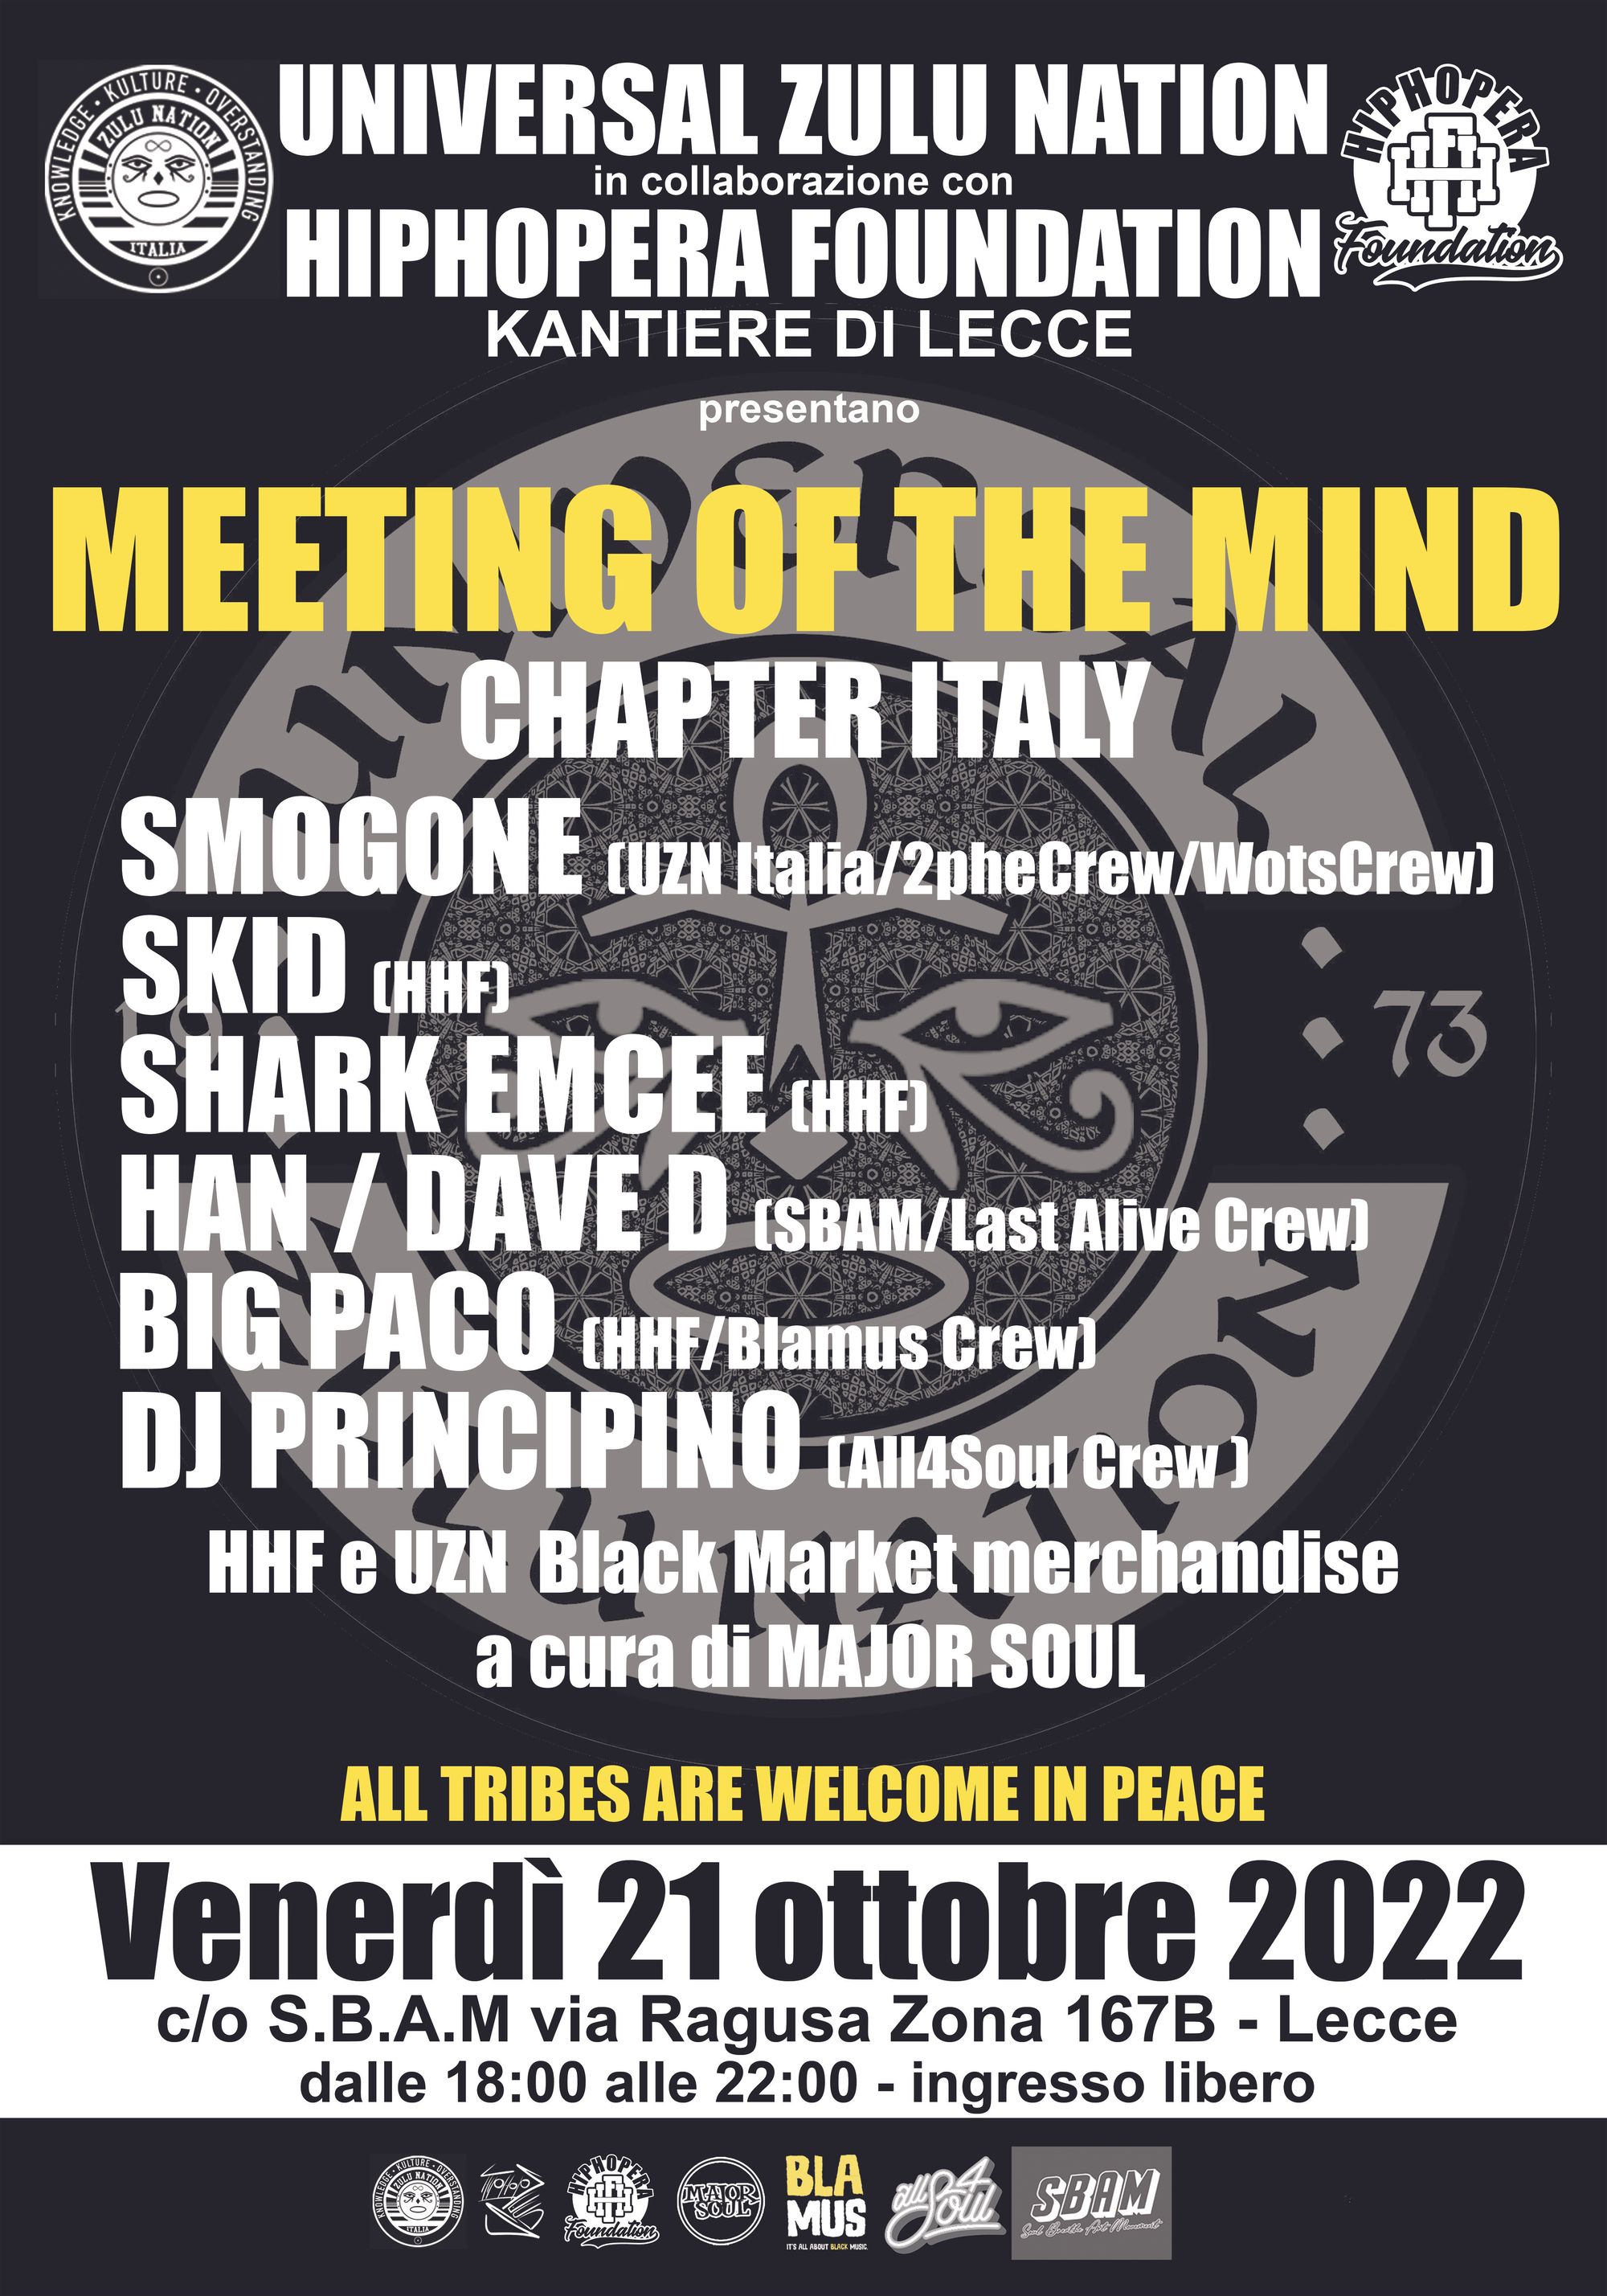 HipHopSeeds Sponsor Event: Meeting of the Minds (Lecce)